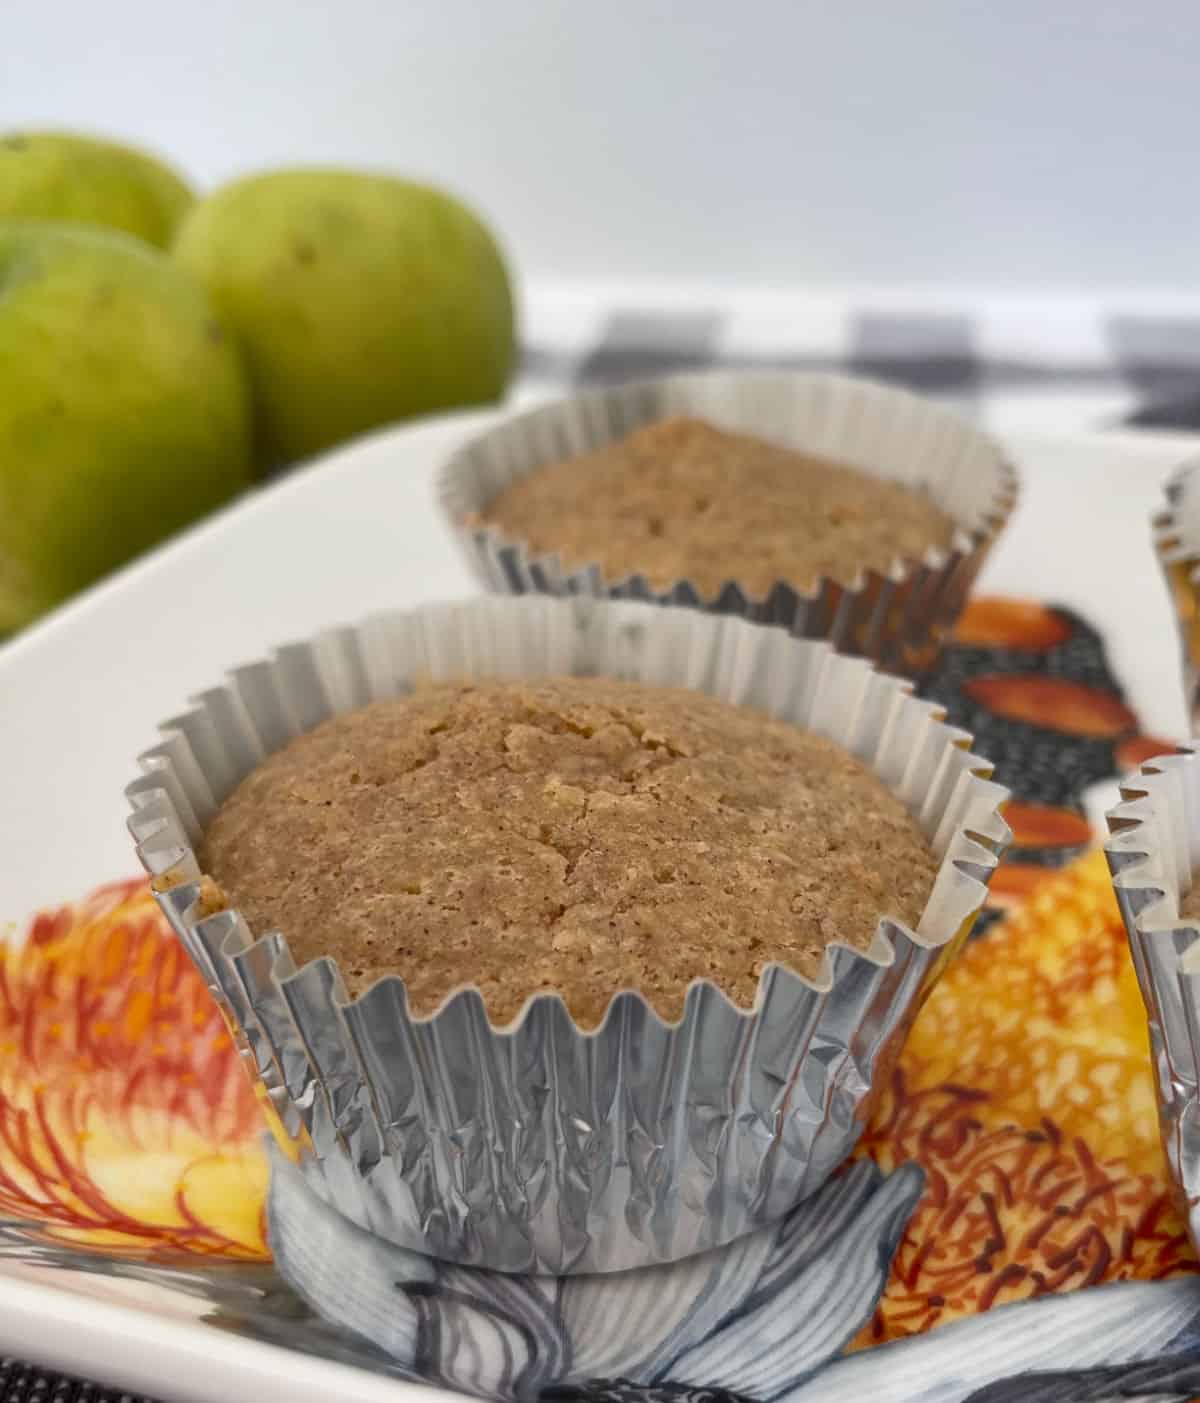 Apple and Cinnamon Muffins sitting on a flowered serving tray. In the background there are green apples and a checkered tea towel.